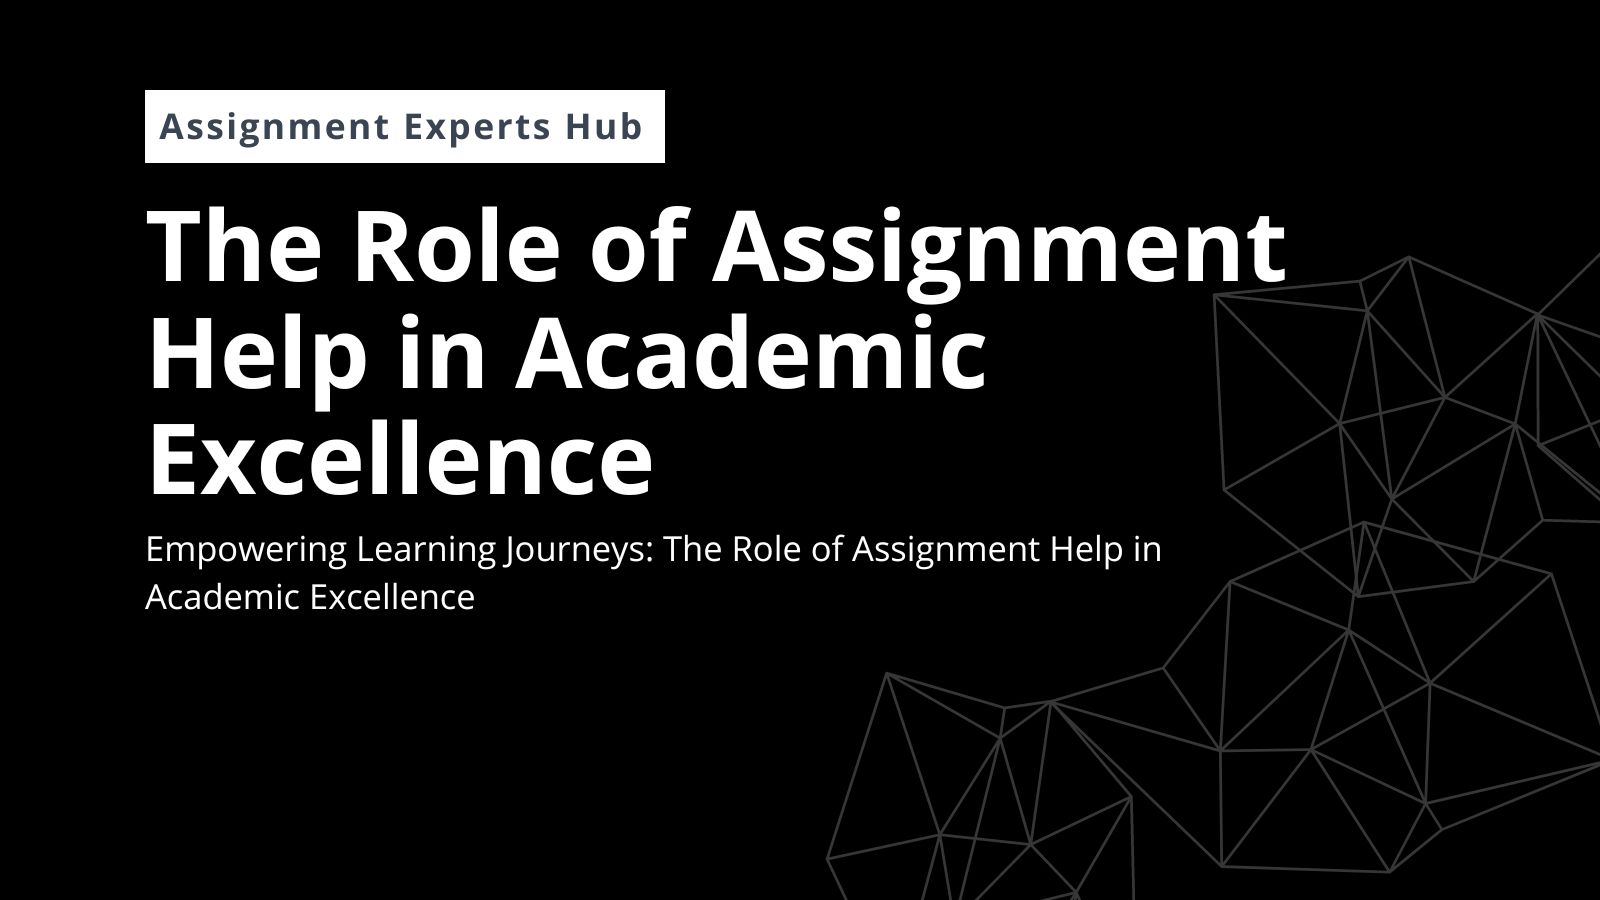 The Role of Assignment Help in Academic Excellence